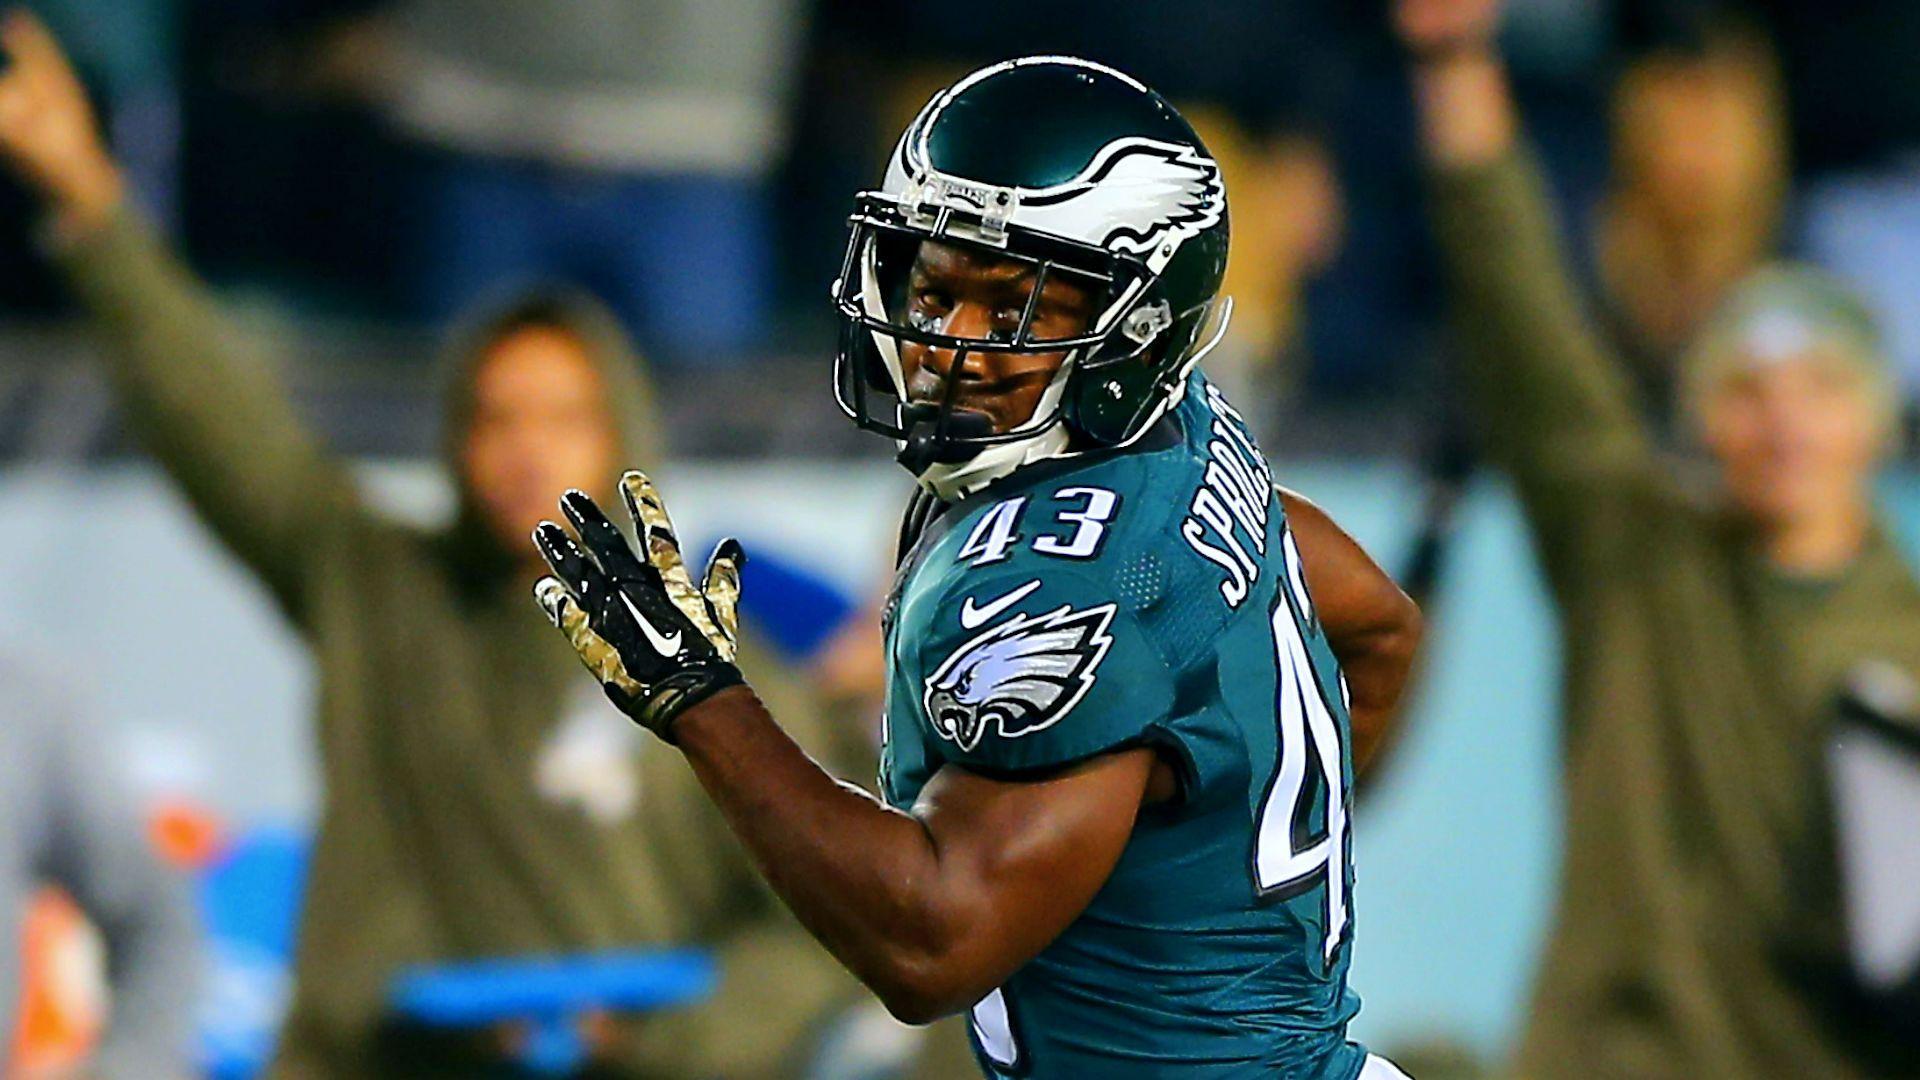 Young Darren Sproles made Pop Warner opponents look silly, too